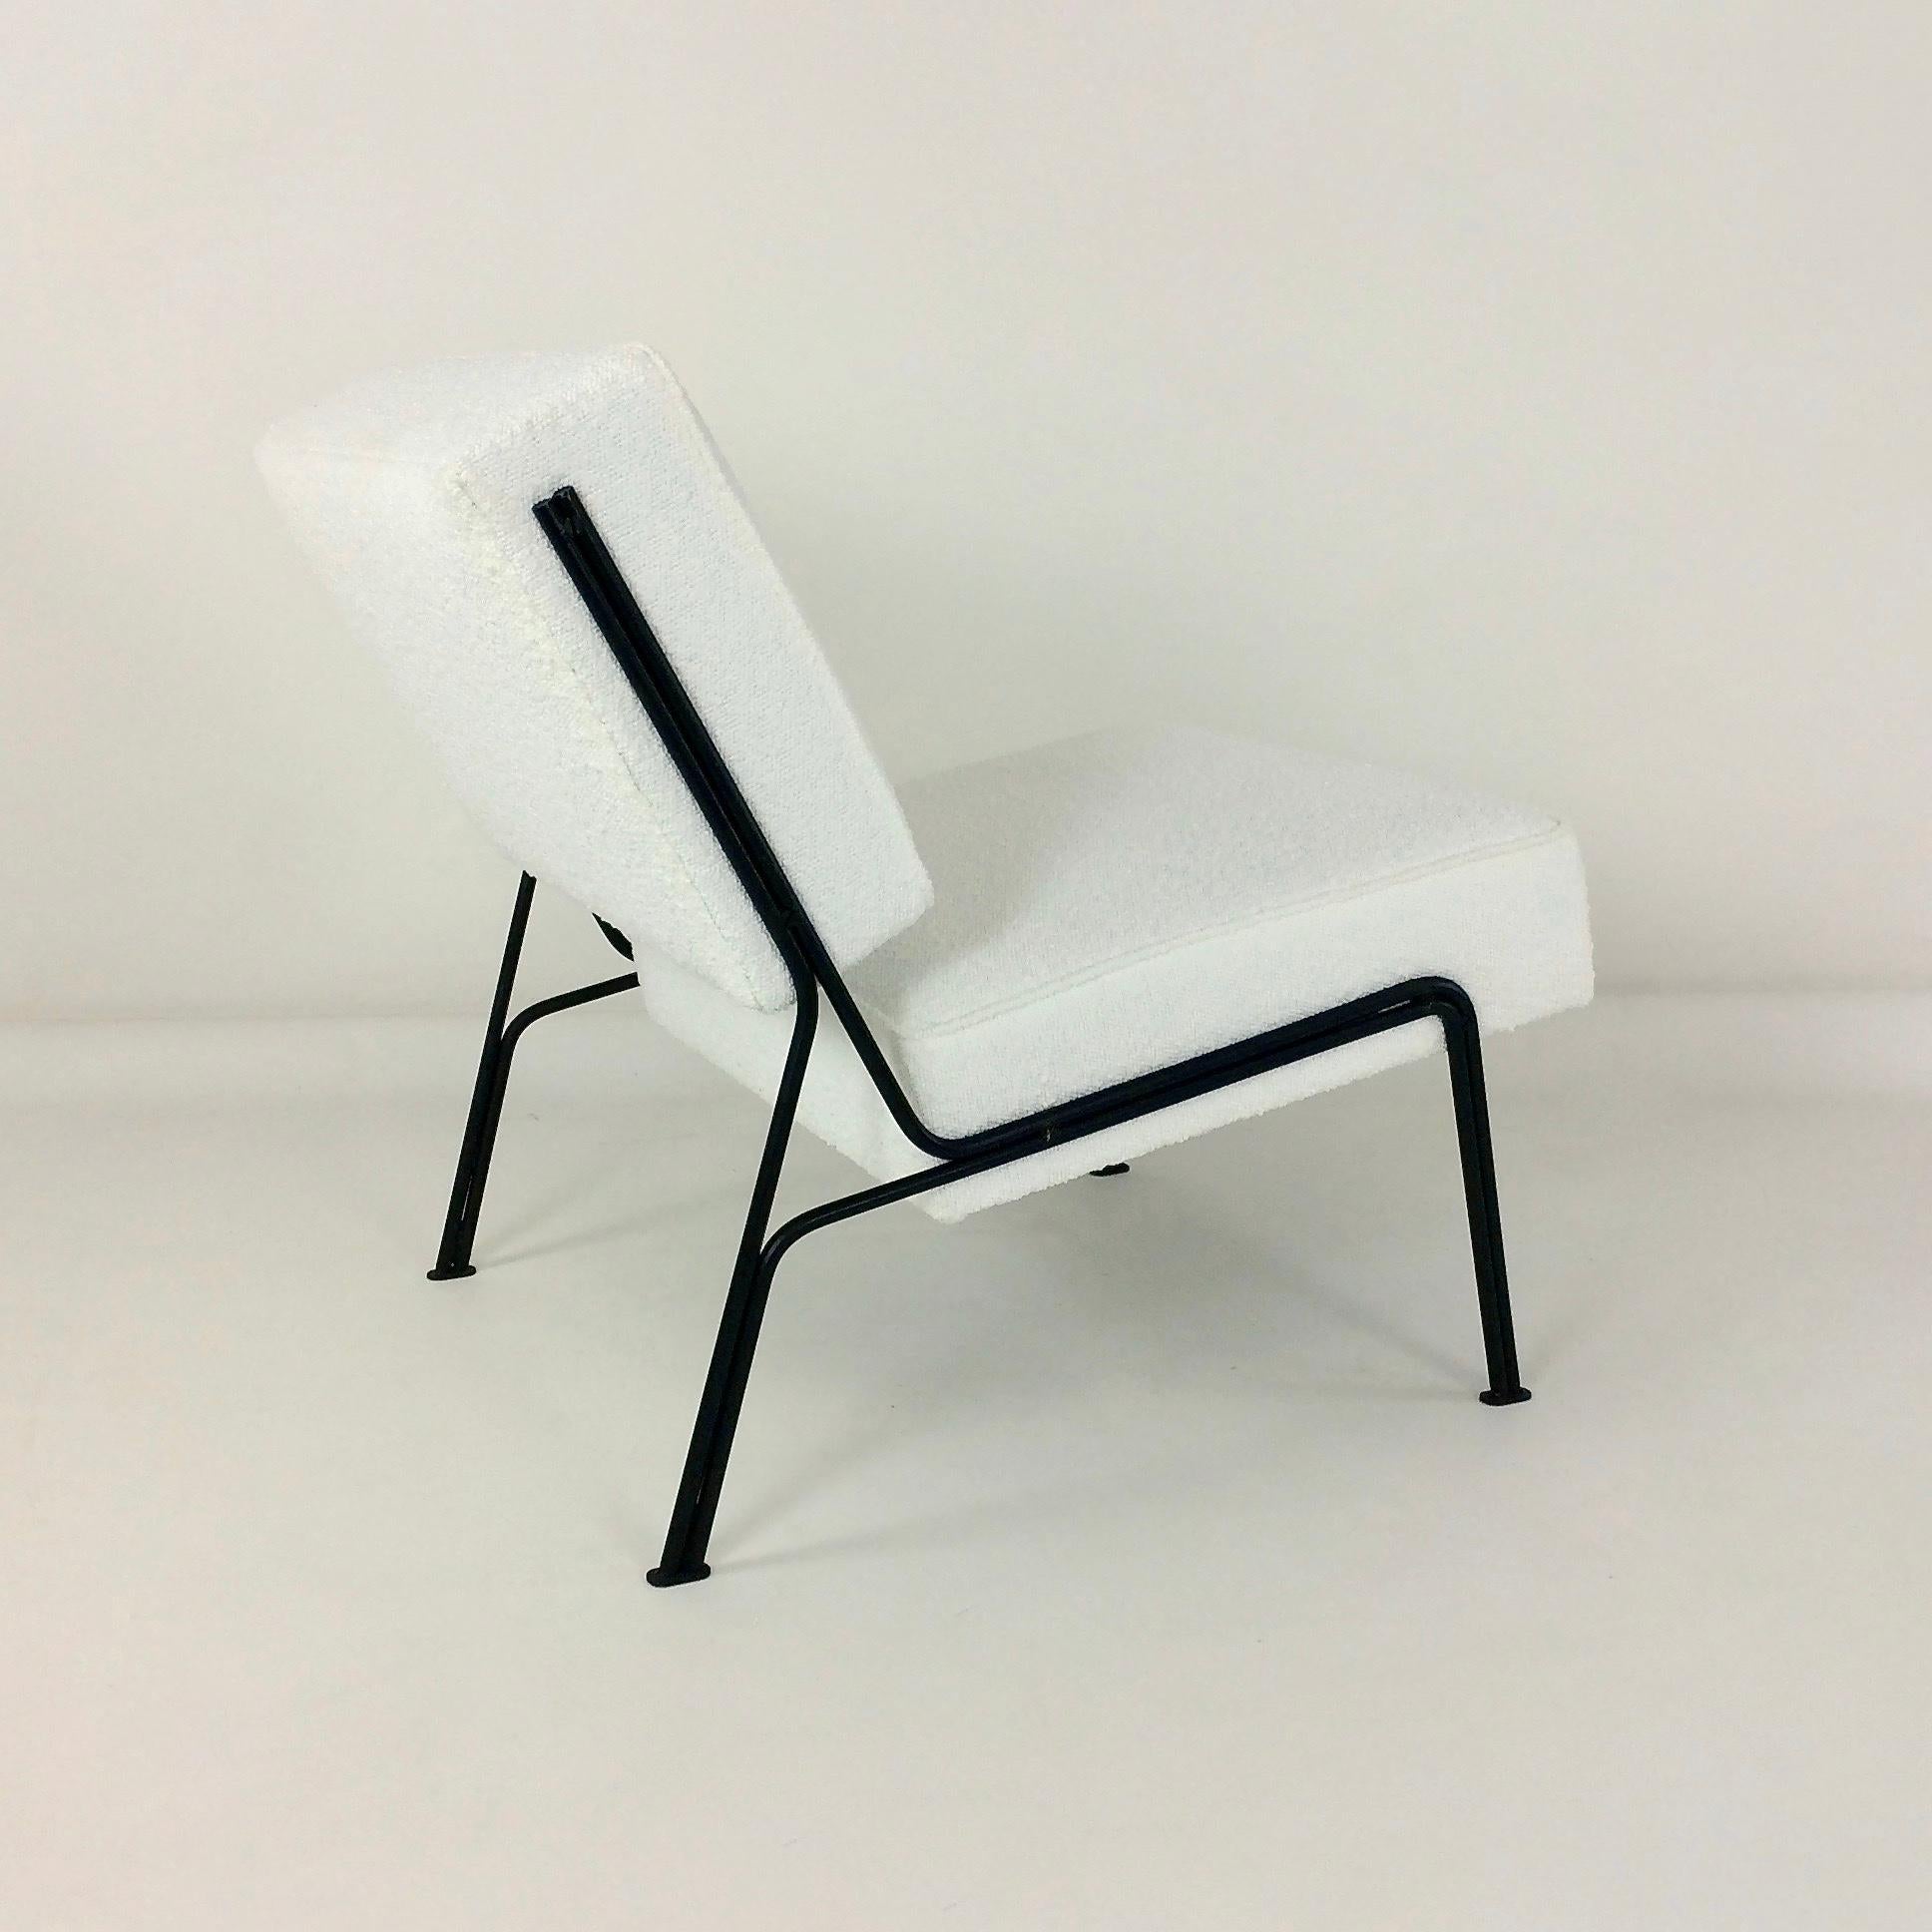 Pair of G2 Chairs By A.R.P. Guariche, Motte, Mortier for Airborne, 1953, France. For Sale 4